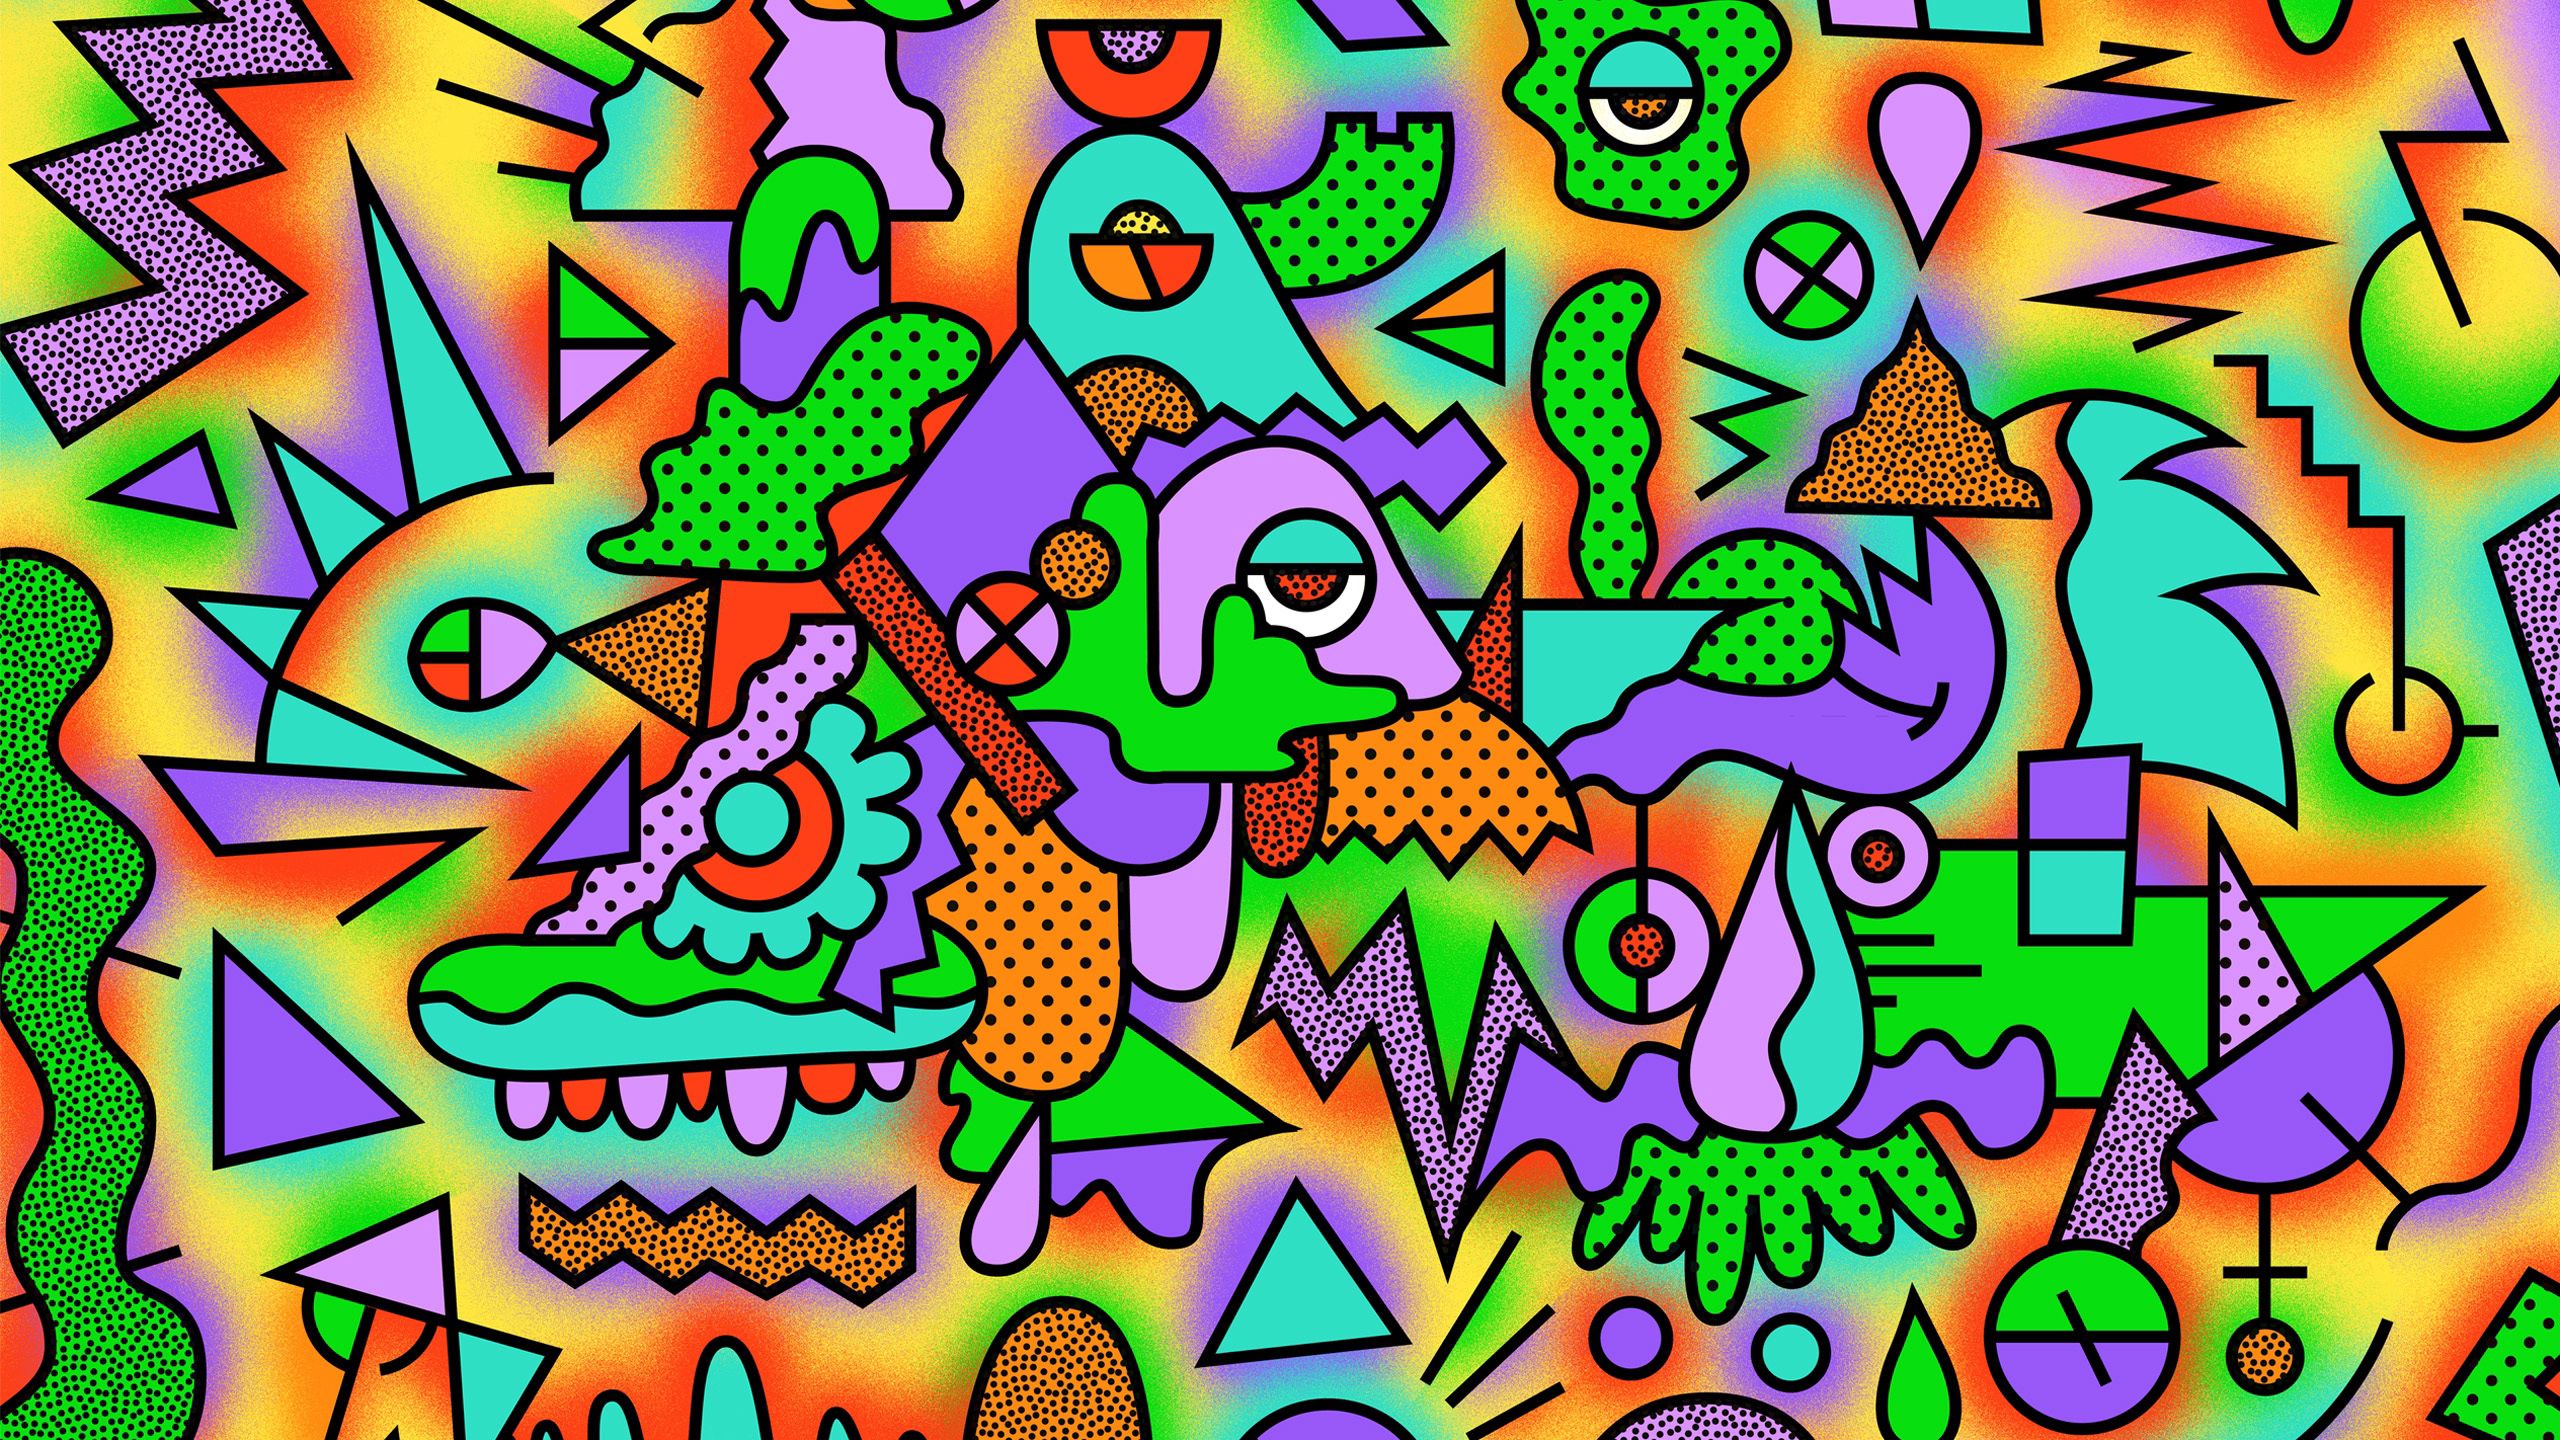 motley, abstract, figures, acid download for free